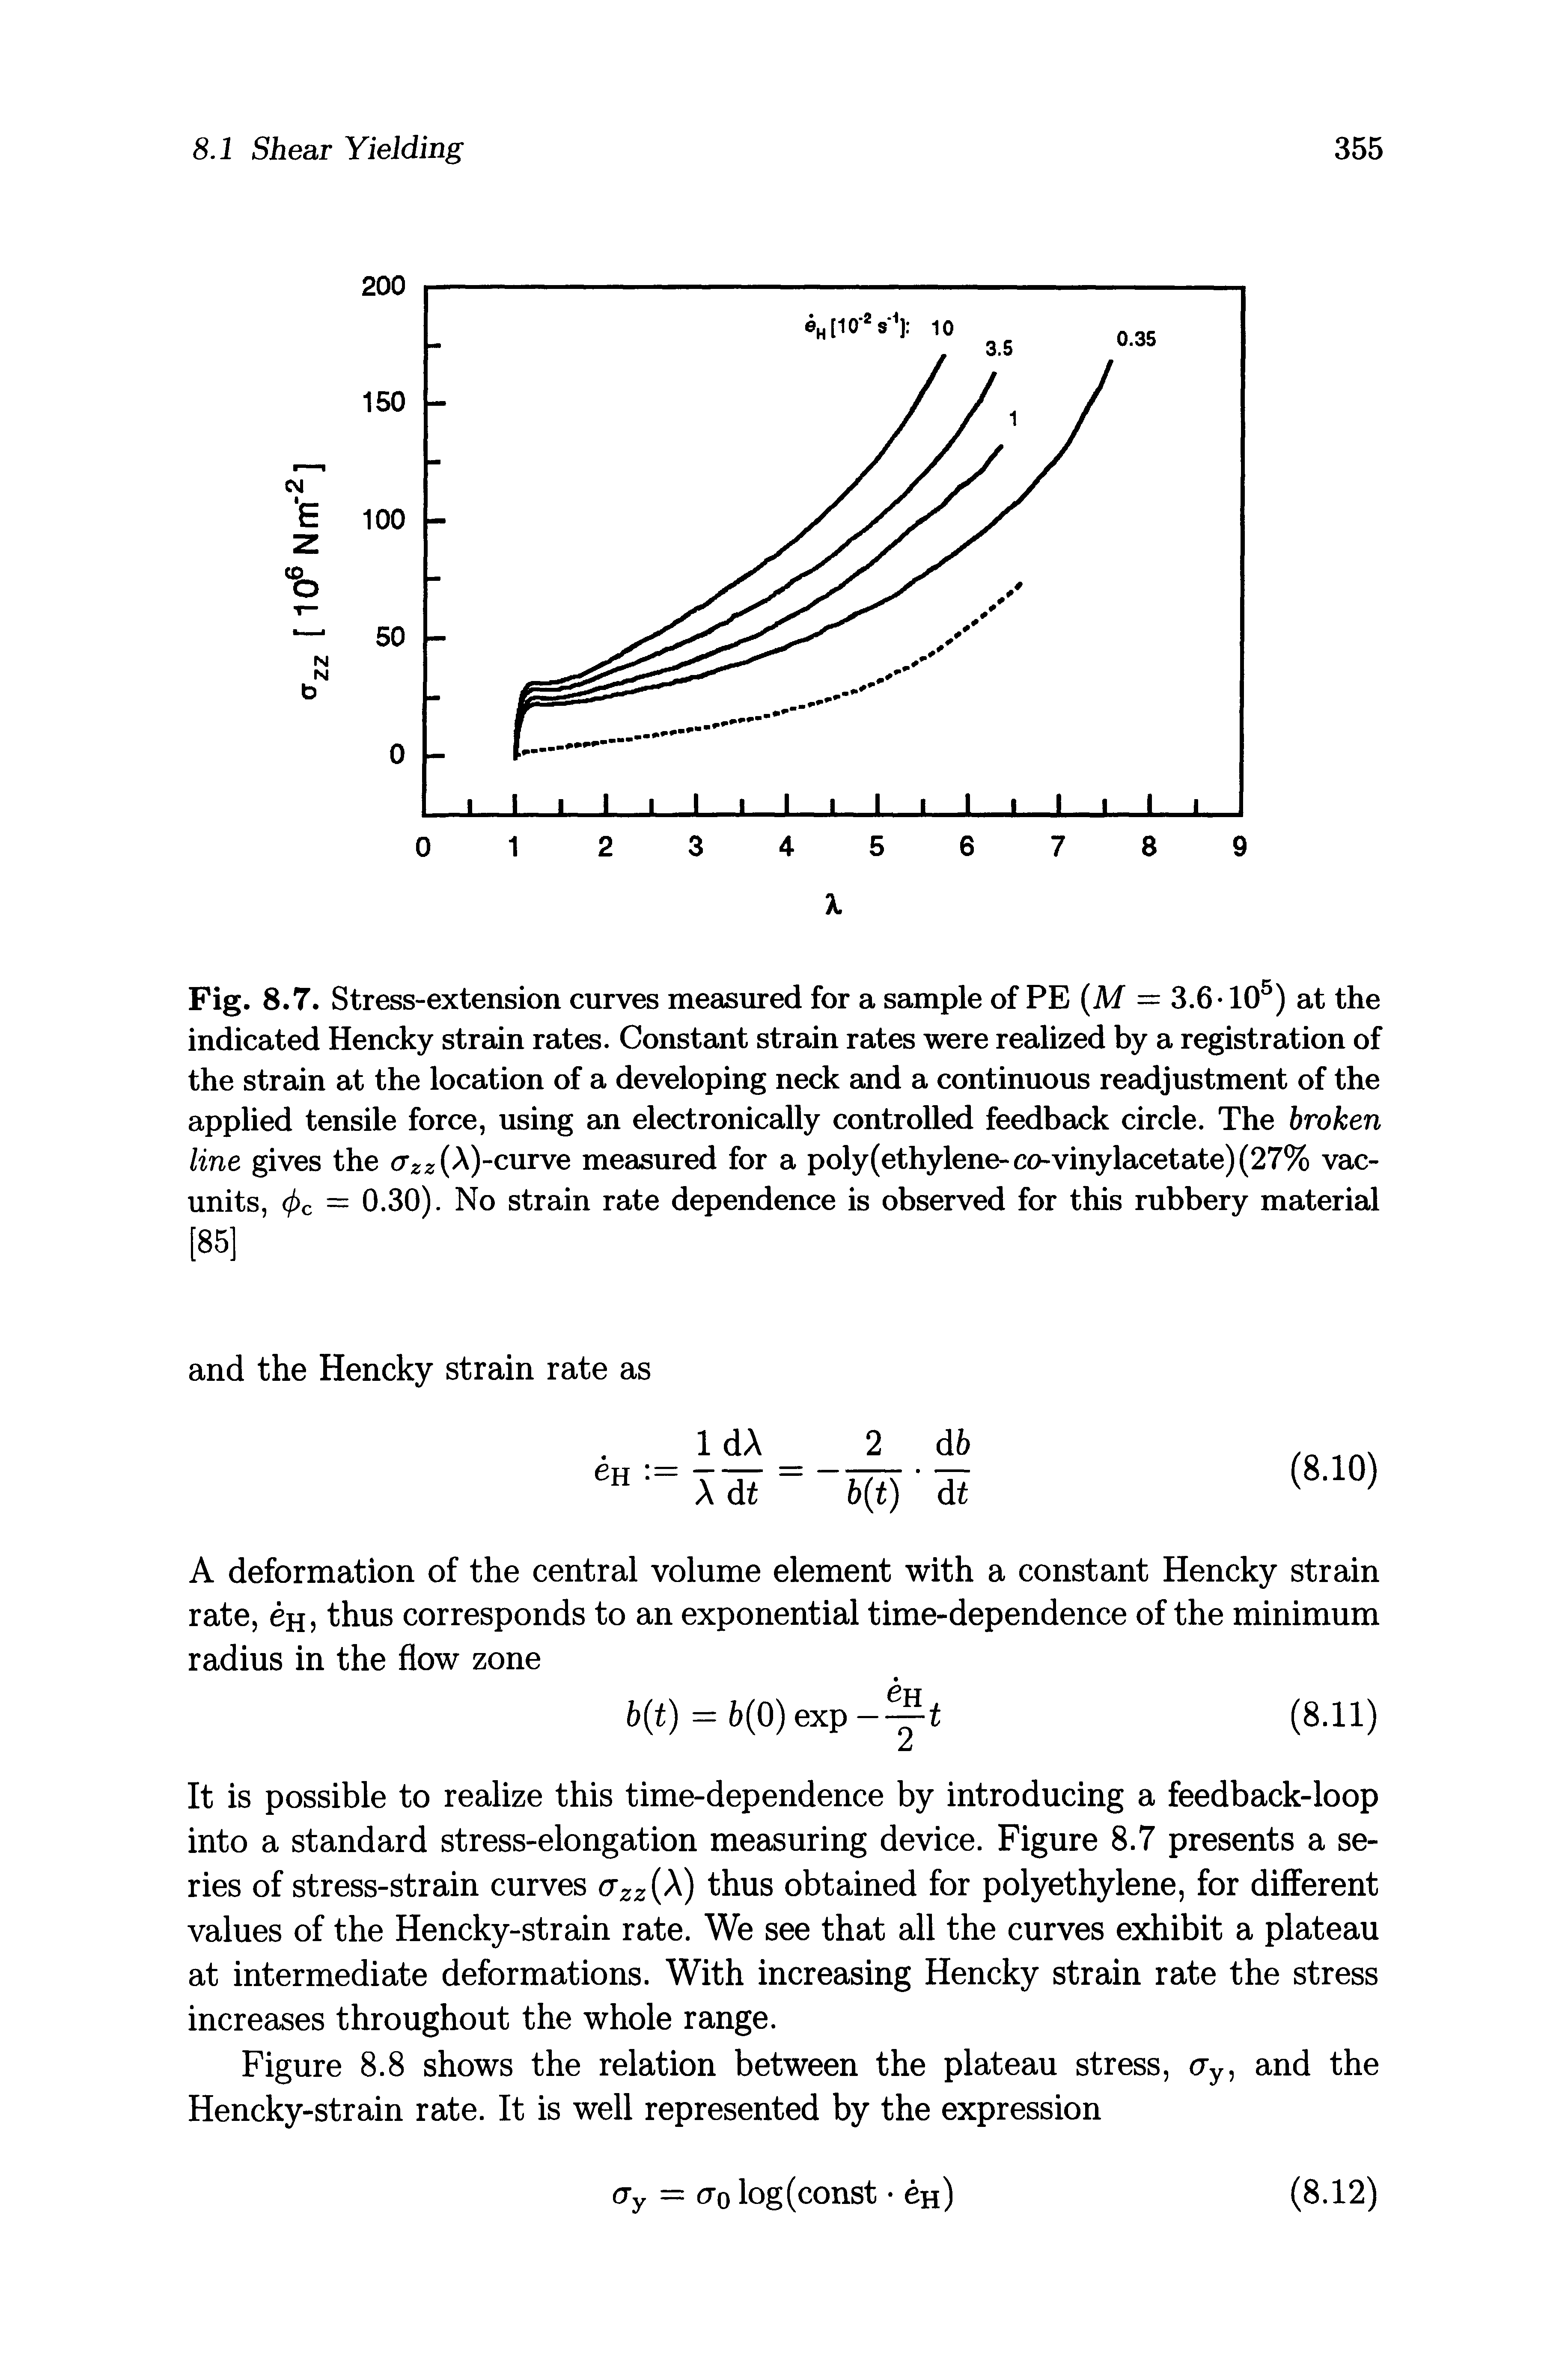 Fig. 8.7. Stress-extension curves measured for a sample of PE (M = 3.6 -10 ) at the indicated Hencky strain rates. Constant strain rates were realized by a registration of the strain at the location of a developing neck and a continuous readjustment of the applied tensile force, using an electronically controlled feedback circle. The broken line gives the cT22 (A)-curve measured for a poly(ethylene-co-vinylacetate)(27% vac-units, (j)c = 0.30). No strain rate dependence is observed for this rubbery material [85]...